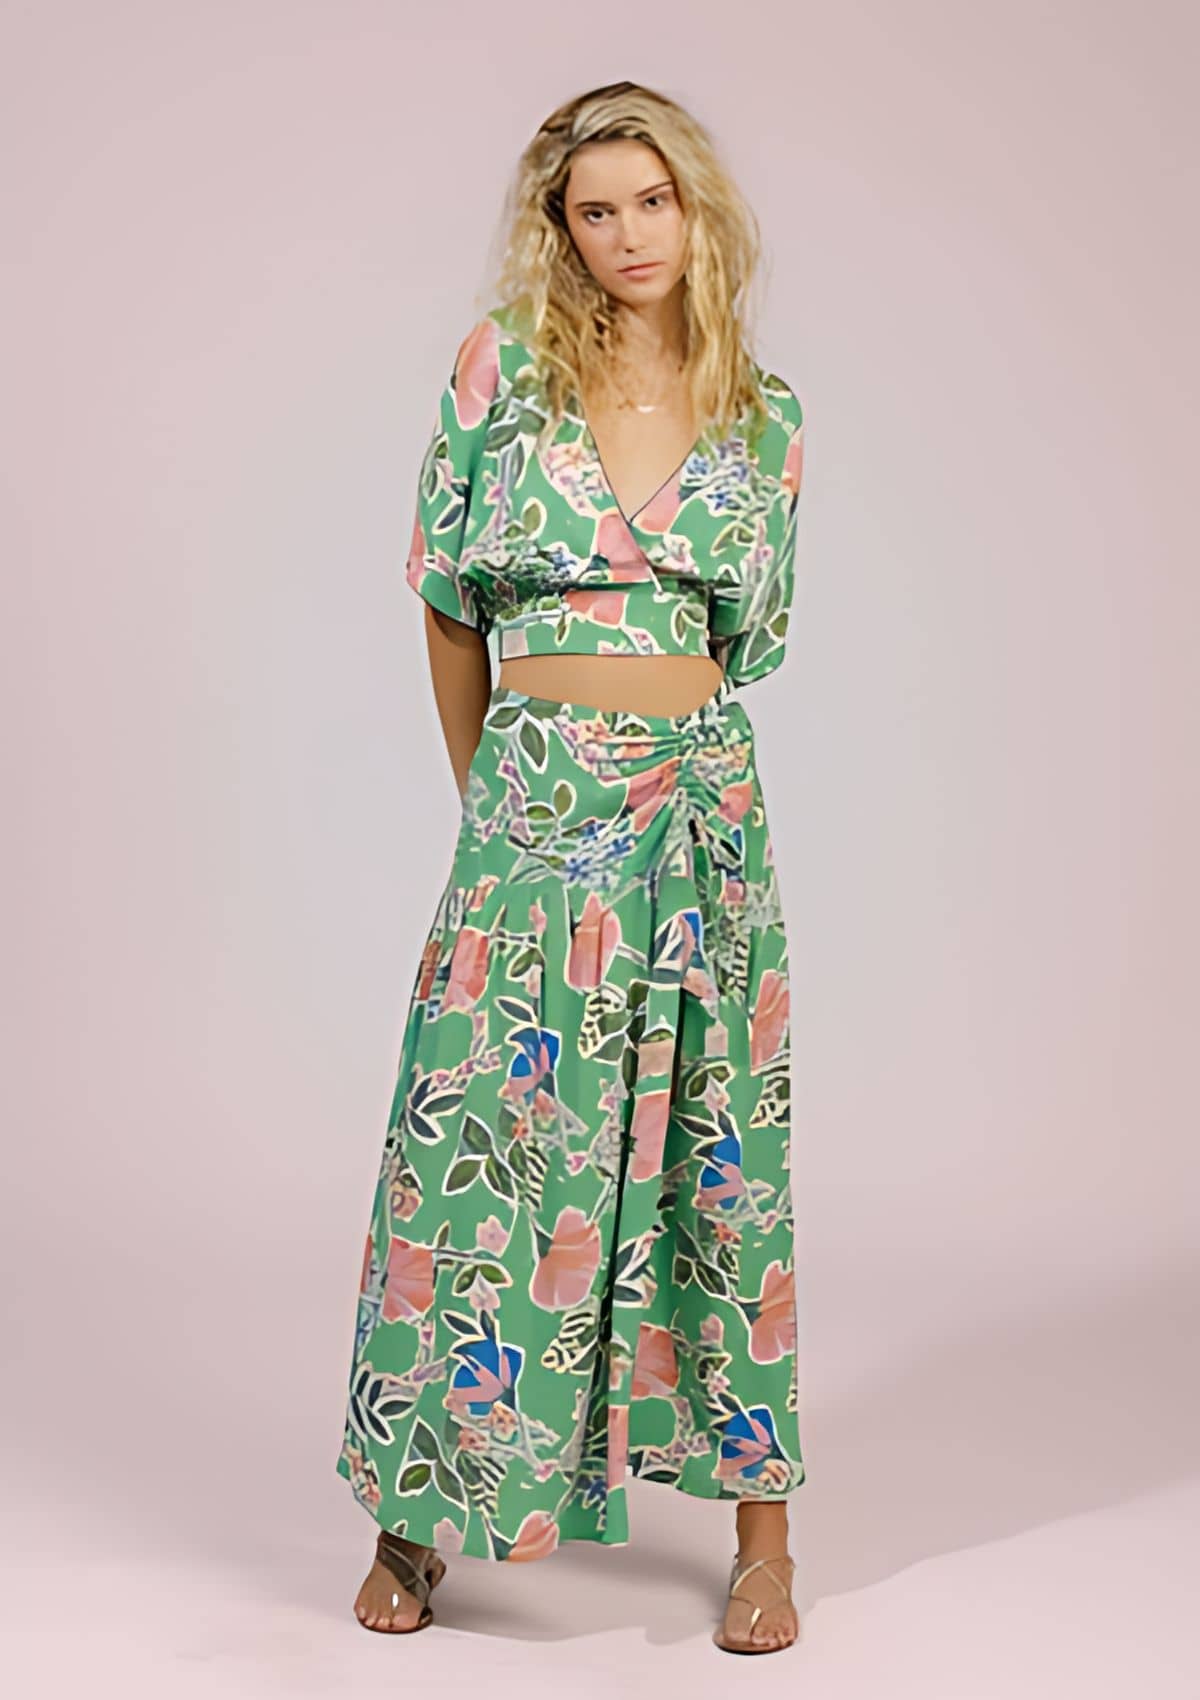 clothing-Fashion-Green skirt with florals-Ruby Jane.